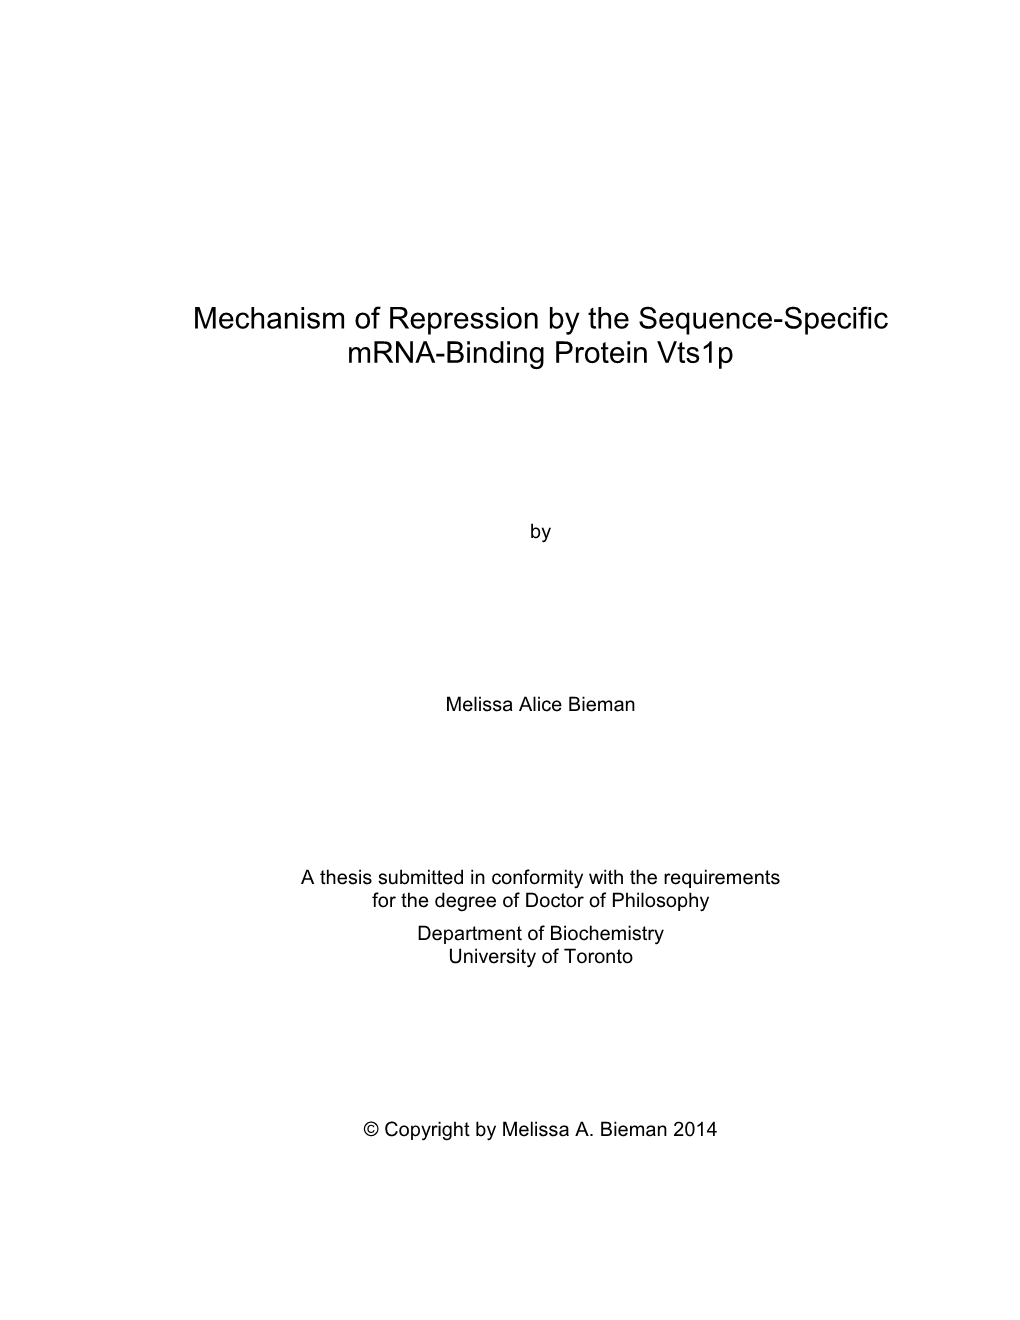 Mechanism of Repression by the Sequence-Specific Mrna-Binding Protein Vts1p